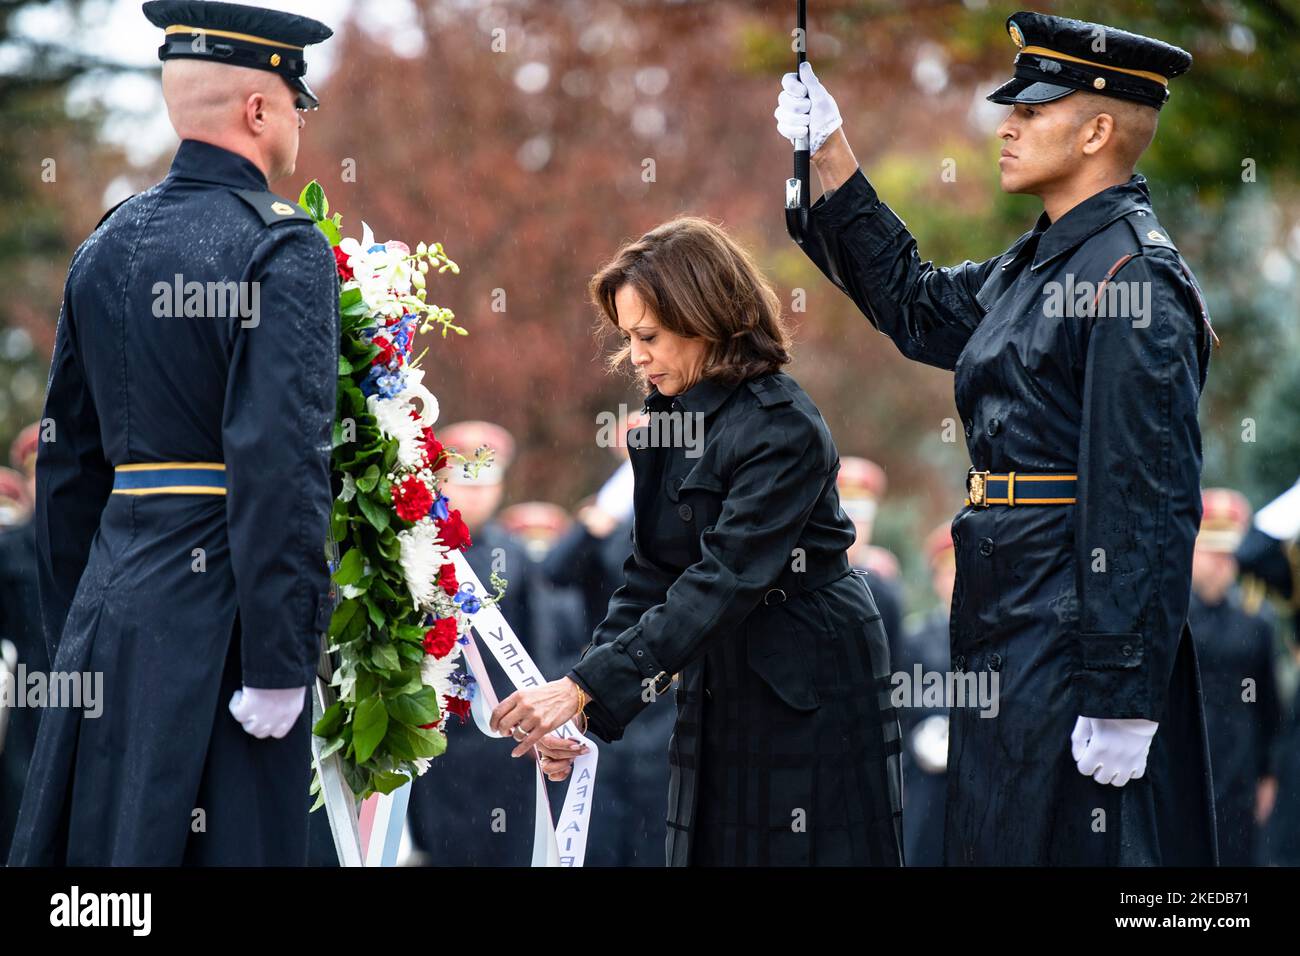 Arlington, United States Of America. 11th Nov, 2022. Arlington, United States of America. 11 November, 2022. U.S. Vice President Kamala Karris, places a wreath at the Tomb of the Unknown Soldier at the annual National Veterans Day Observance Arlington National Cemetery, November 11, 2022 in Arlington, Virginia, USA. Credit: Elizabeth Fraser/U.S. Army/Alamy Live News Stock Photo